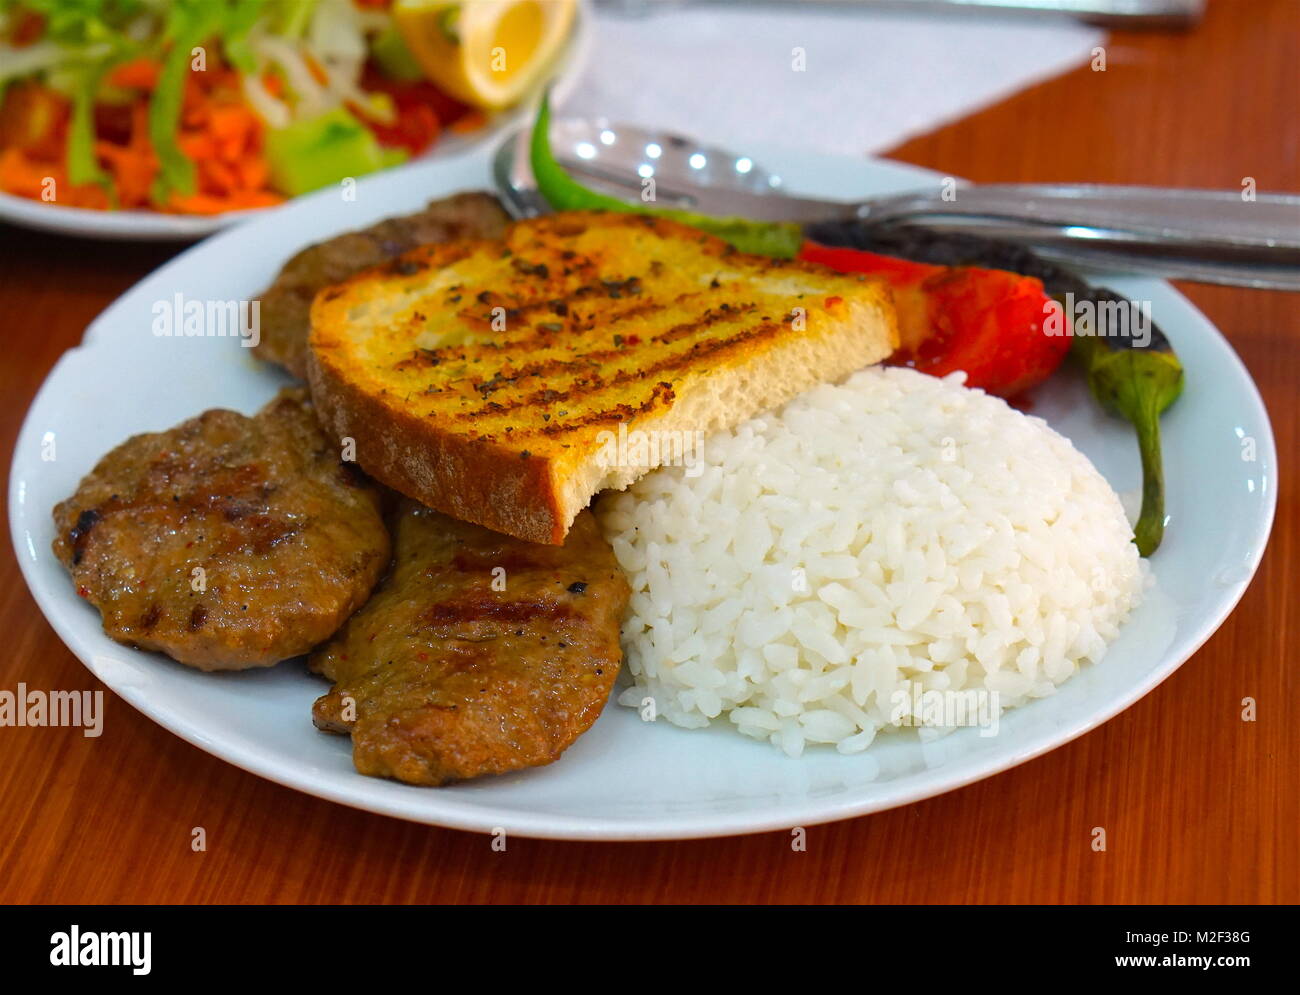 Cooked rice, bread and turkis meat ball Stock Photo